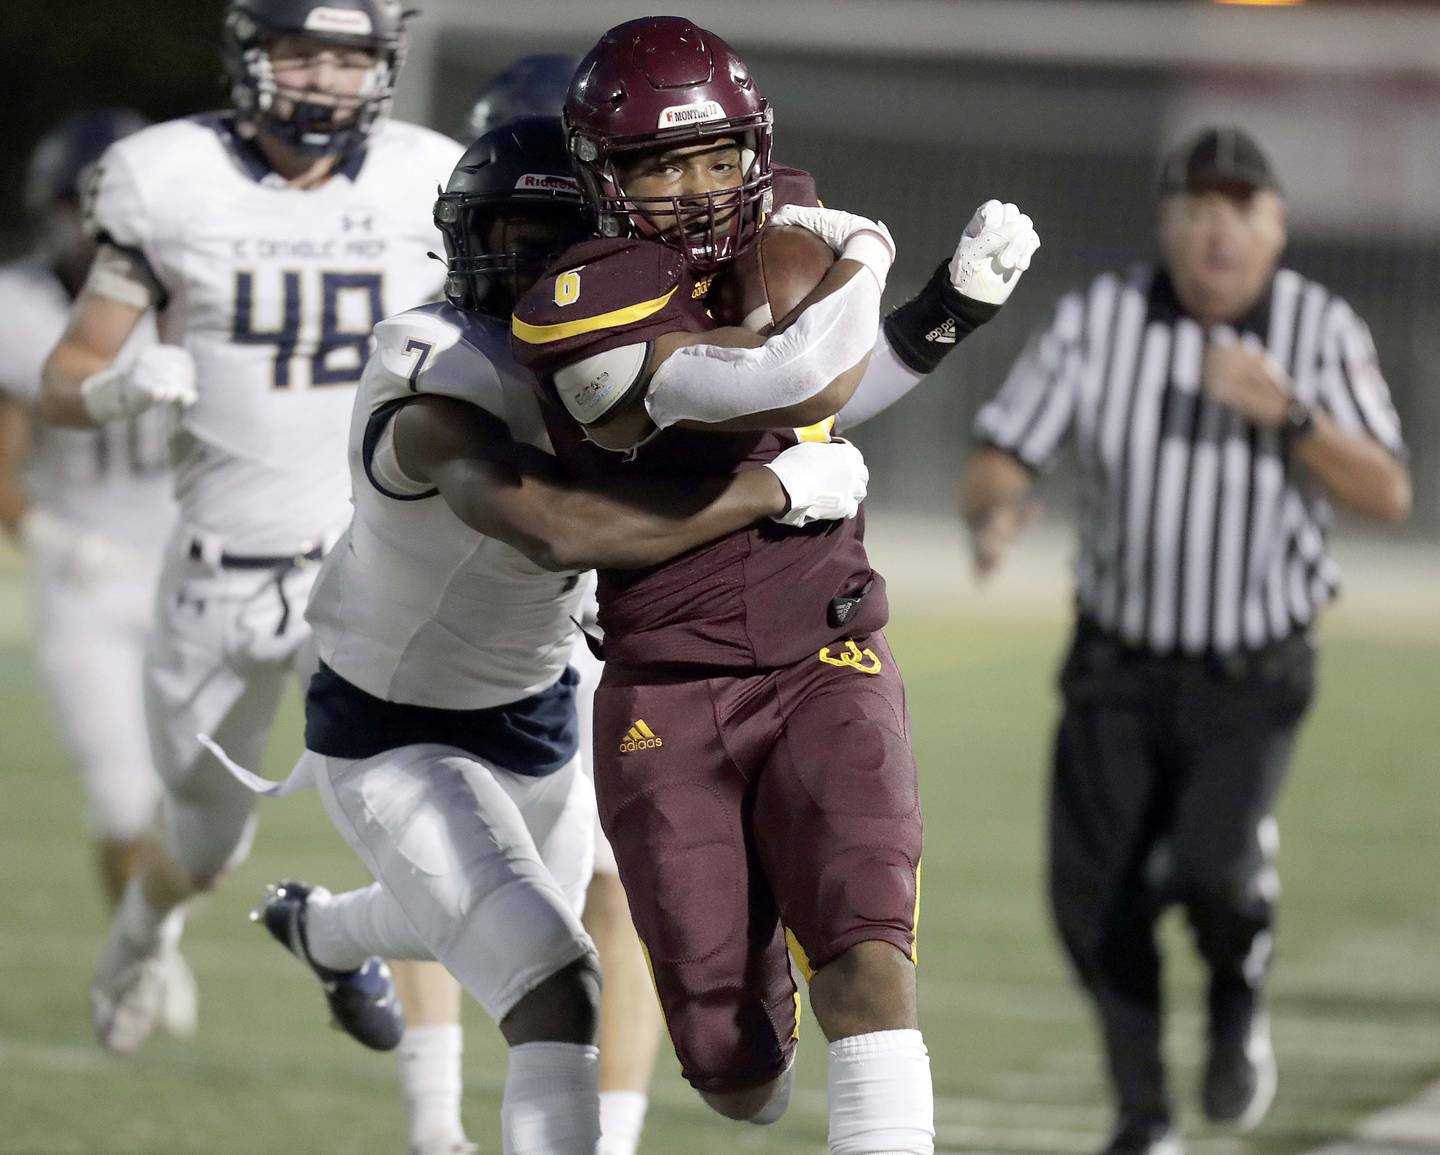 Montini's Josh Robinson (6) tries to slip past IC Catholic Prep's Denzel Gibson (7) during football Friday August 27, 2021 in Lombard.